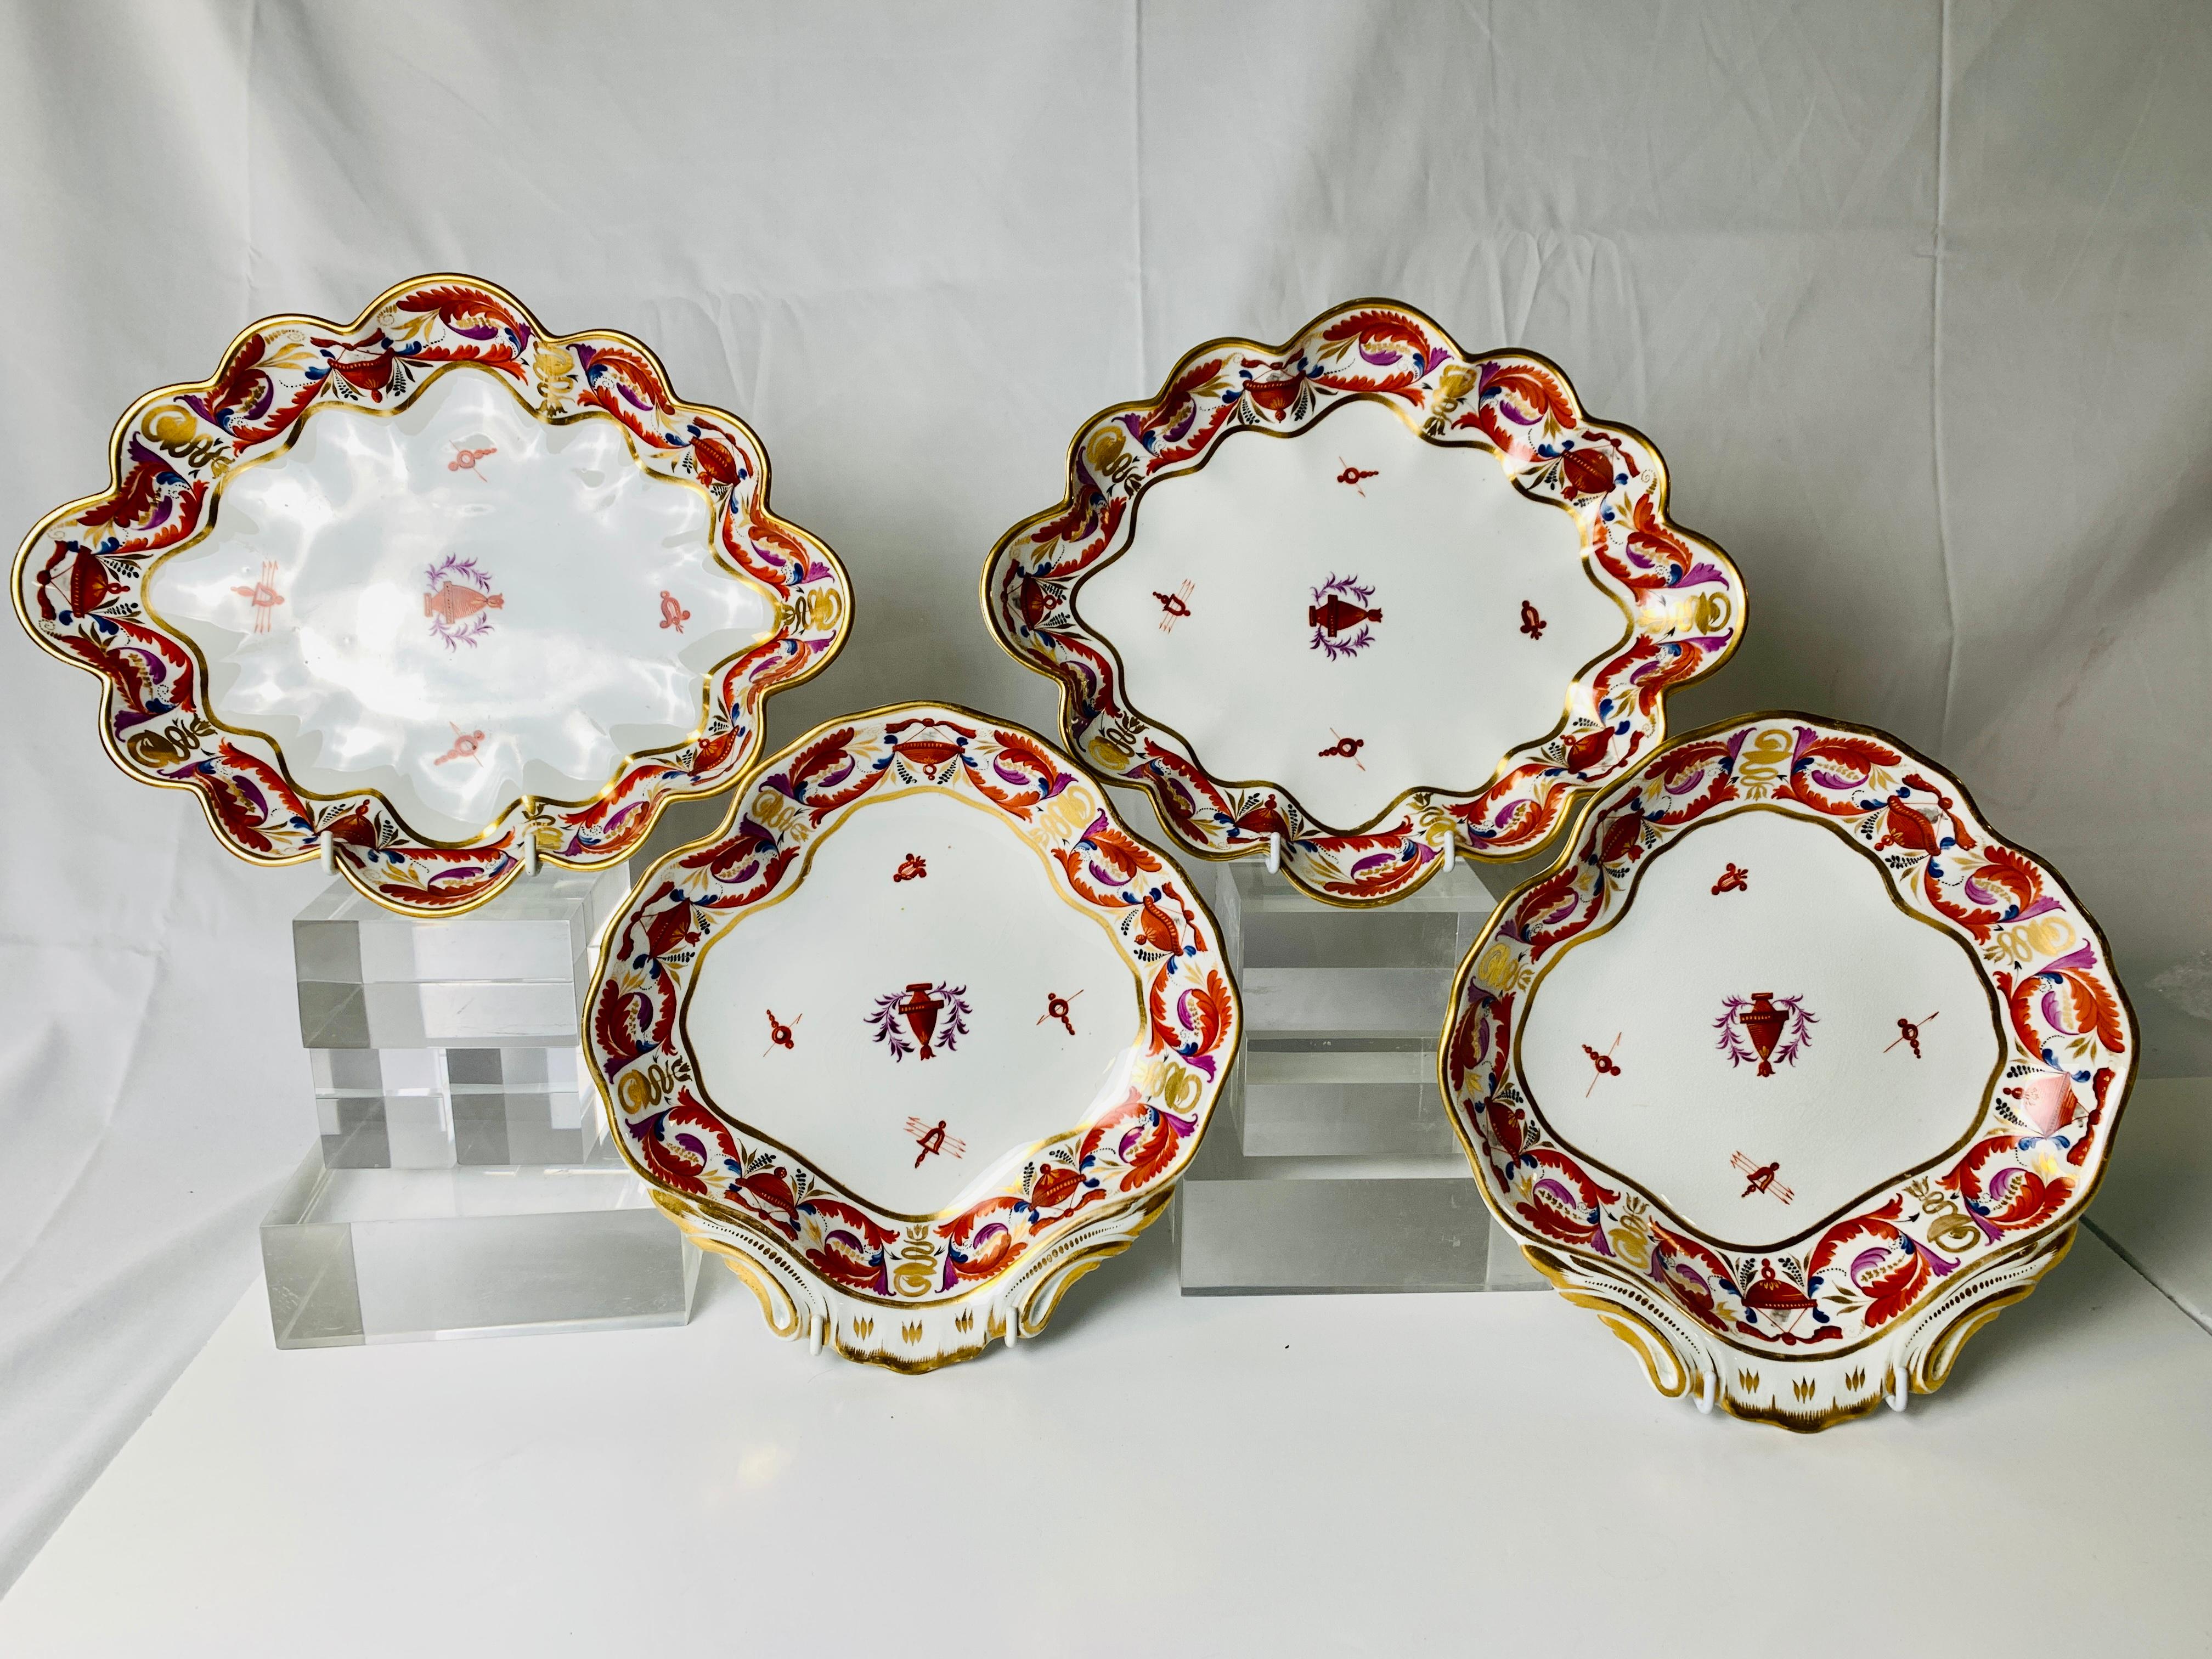 This group of four Derby Porcelain dishes was hand-painted in England circa 1810. An exquisite design of curling feathers and neoclassical objects decorates the borders. The color combinations are what makes these dishes so wonderful: red shading